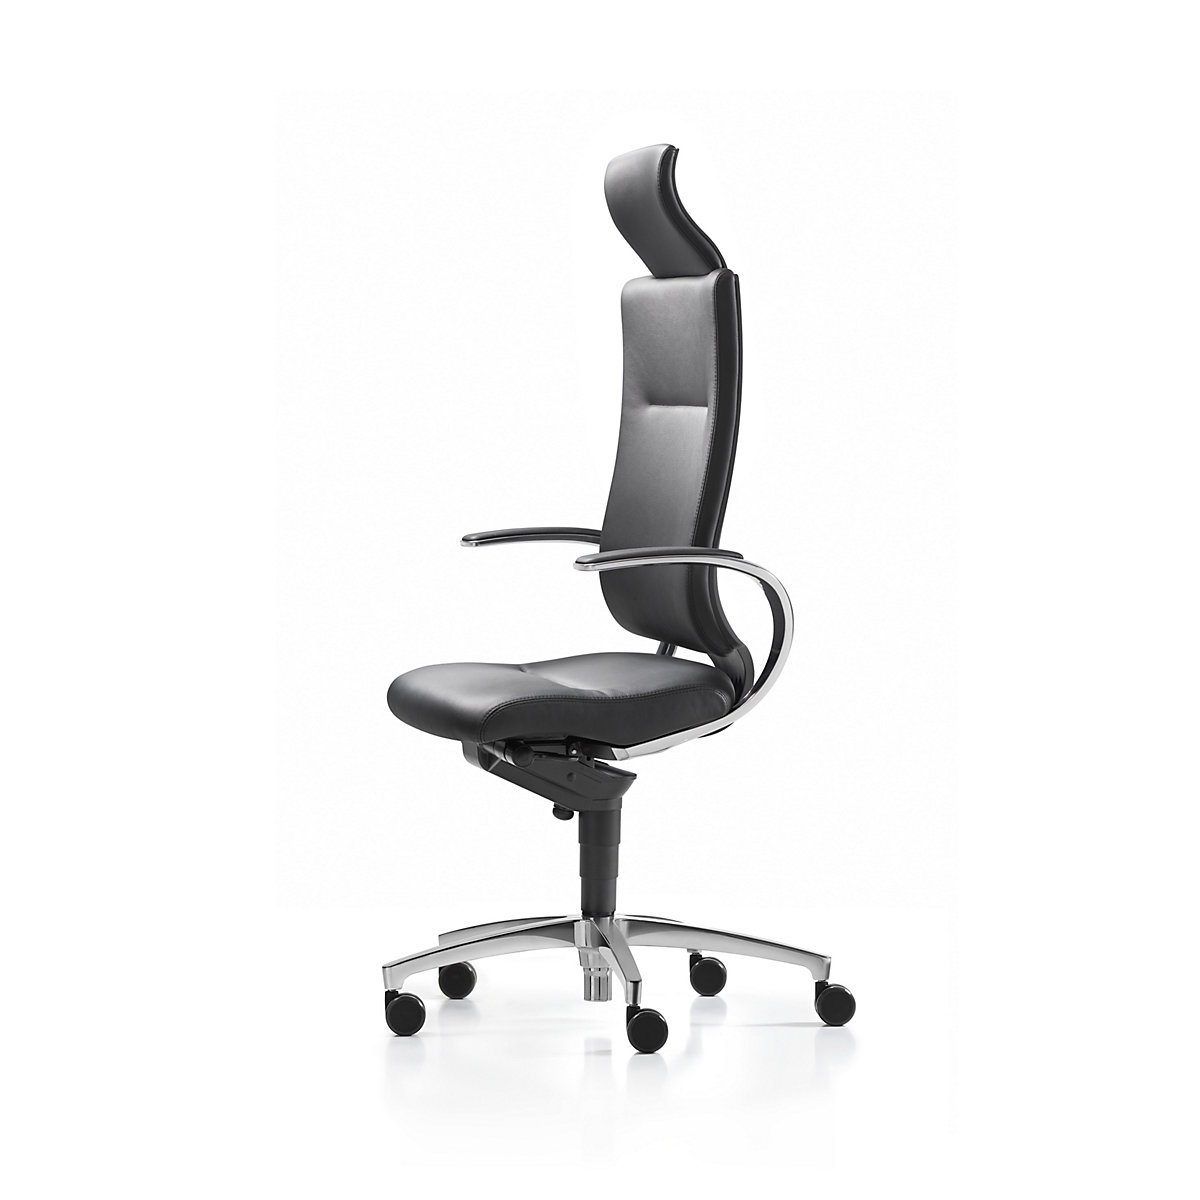 InTouch office swivel chair – Dauphin